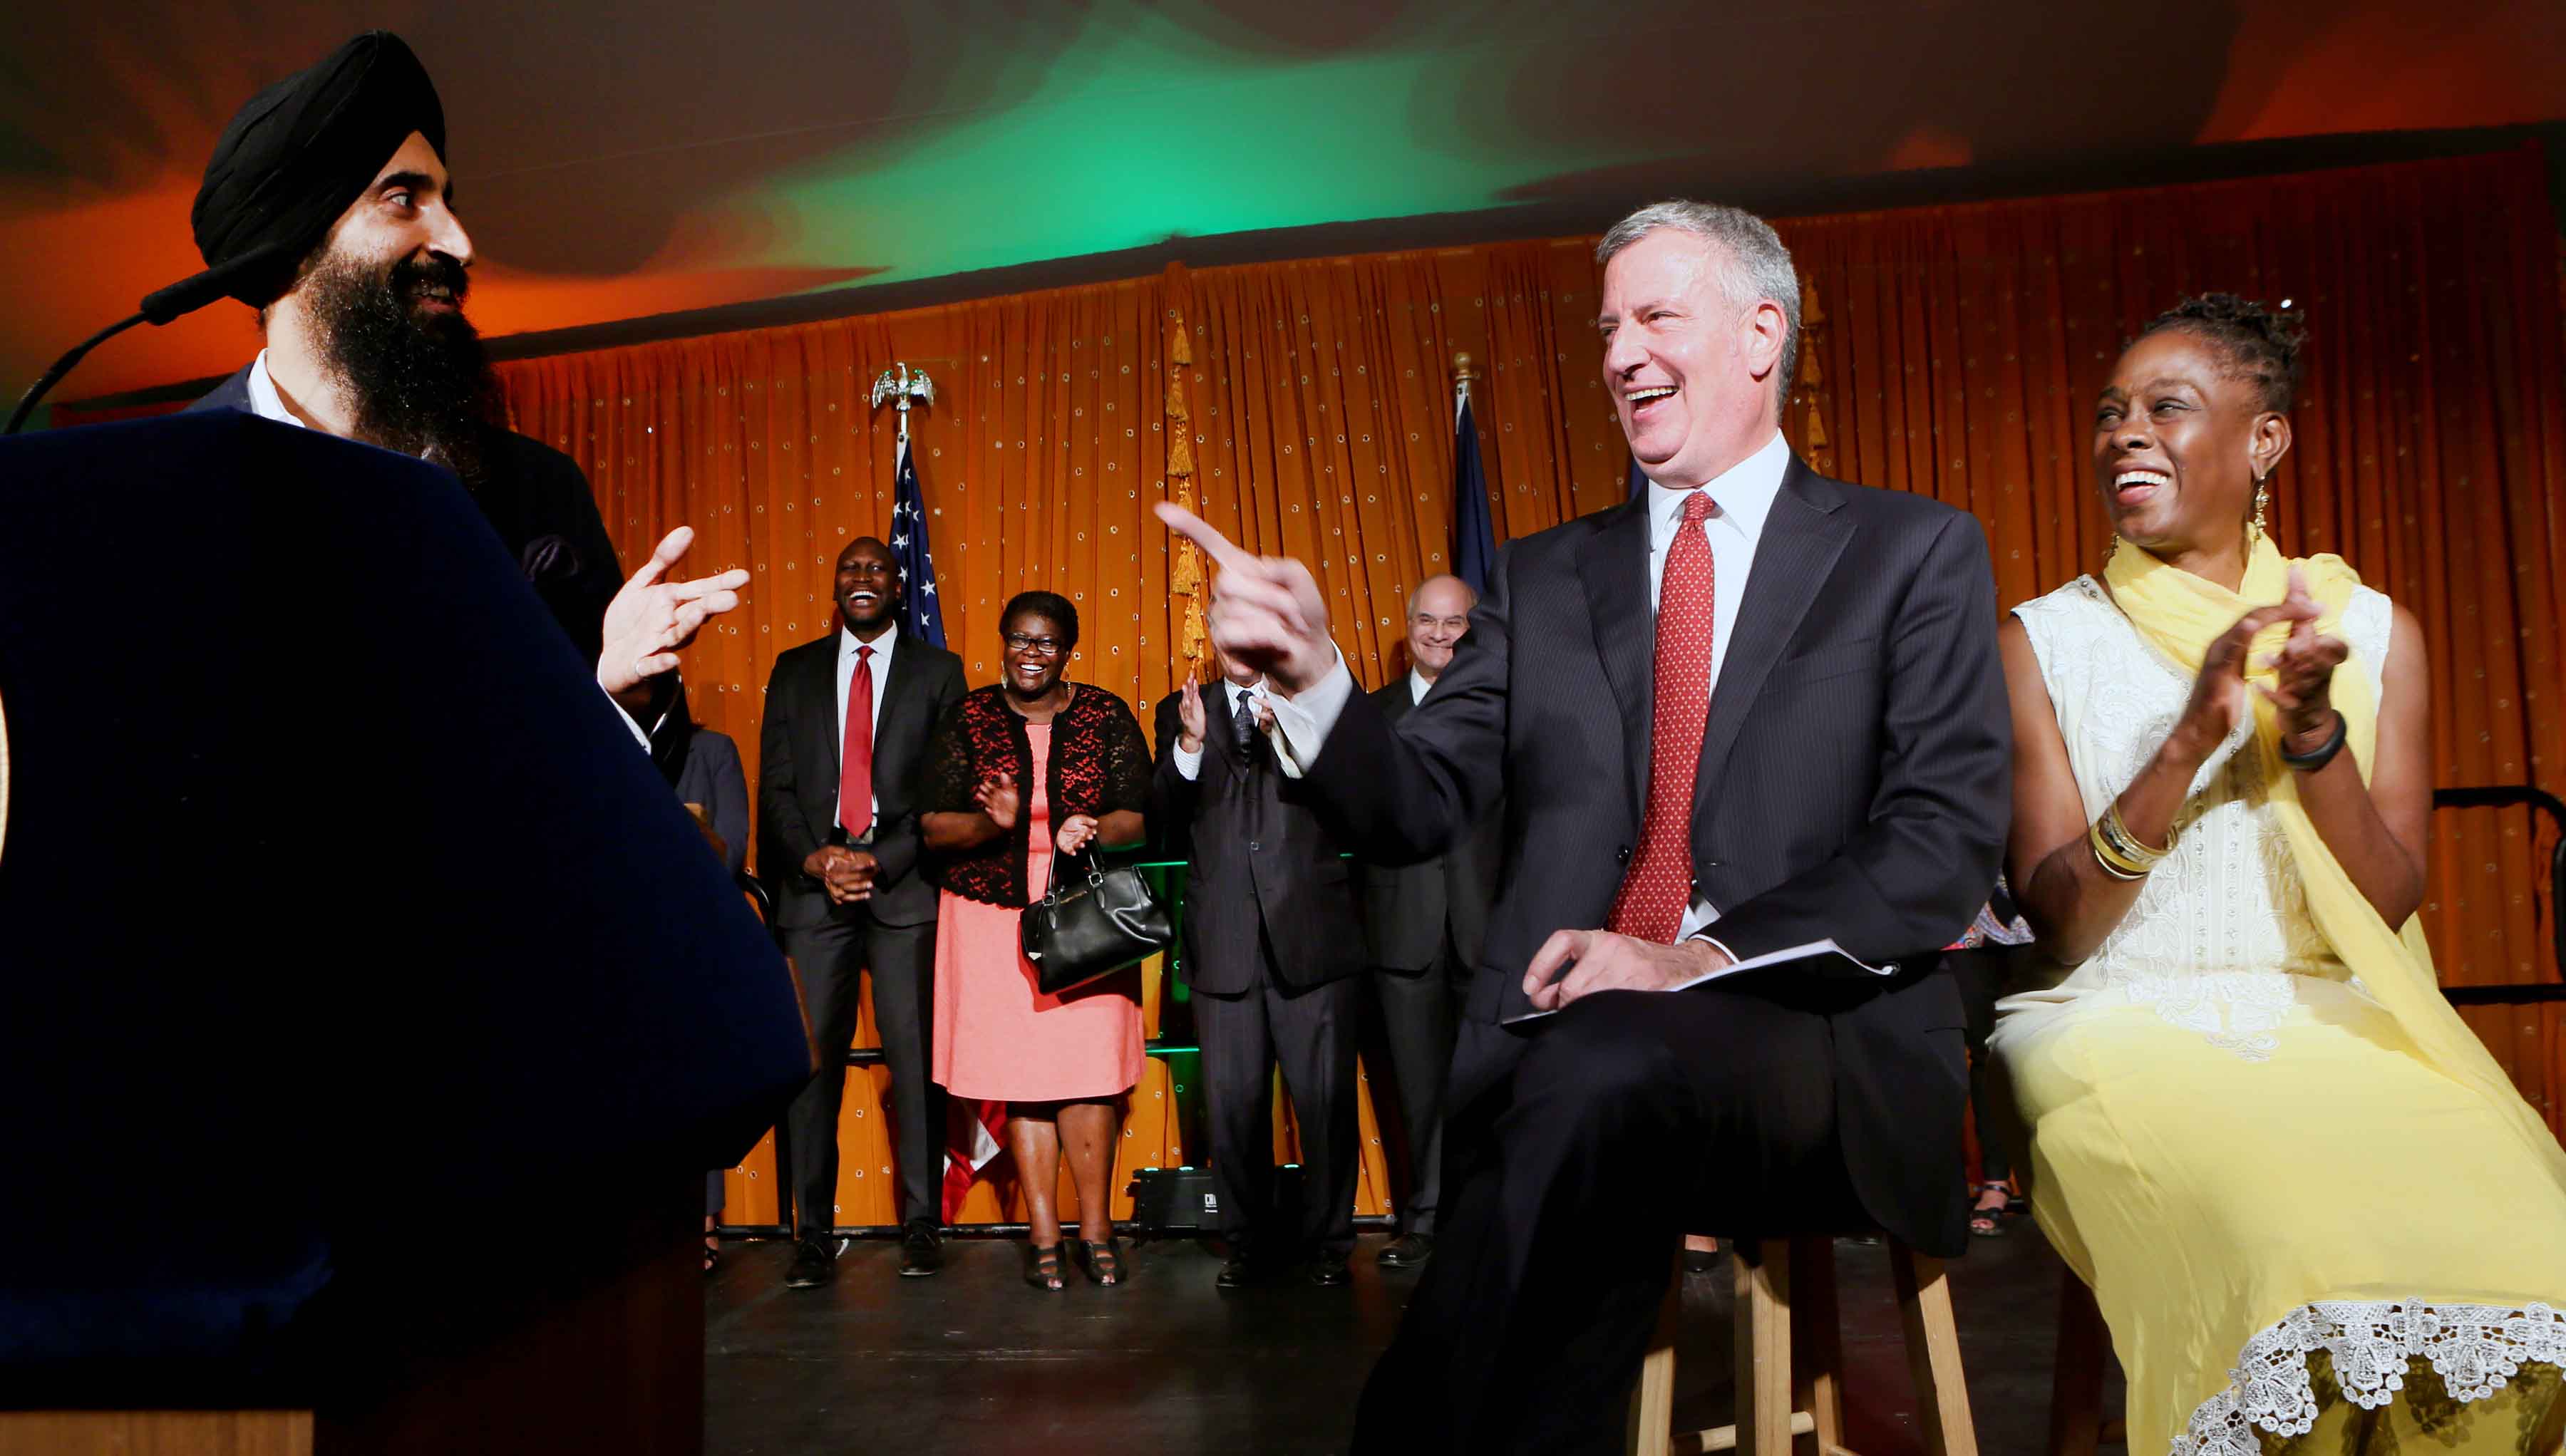 New York City Mayor Bill de Blasio and his wife Chirlane McCray (right), enjoy a lighter moment as Waris Ahluwalia (right), Actor, Designer, Model speaks on the occasion Photo/ Jay Mandal/On Assignment